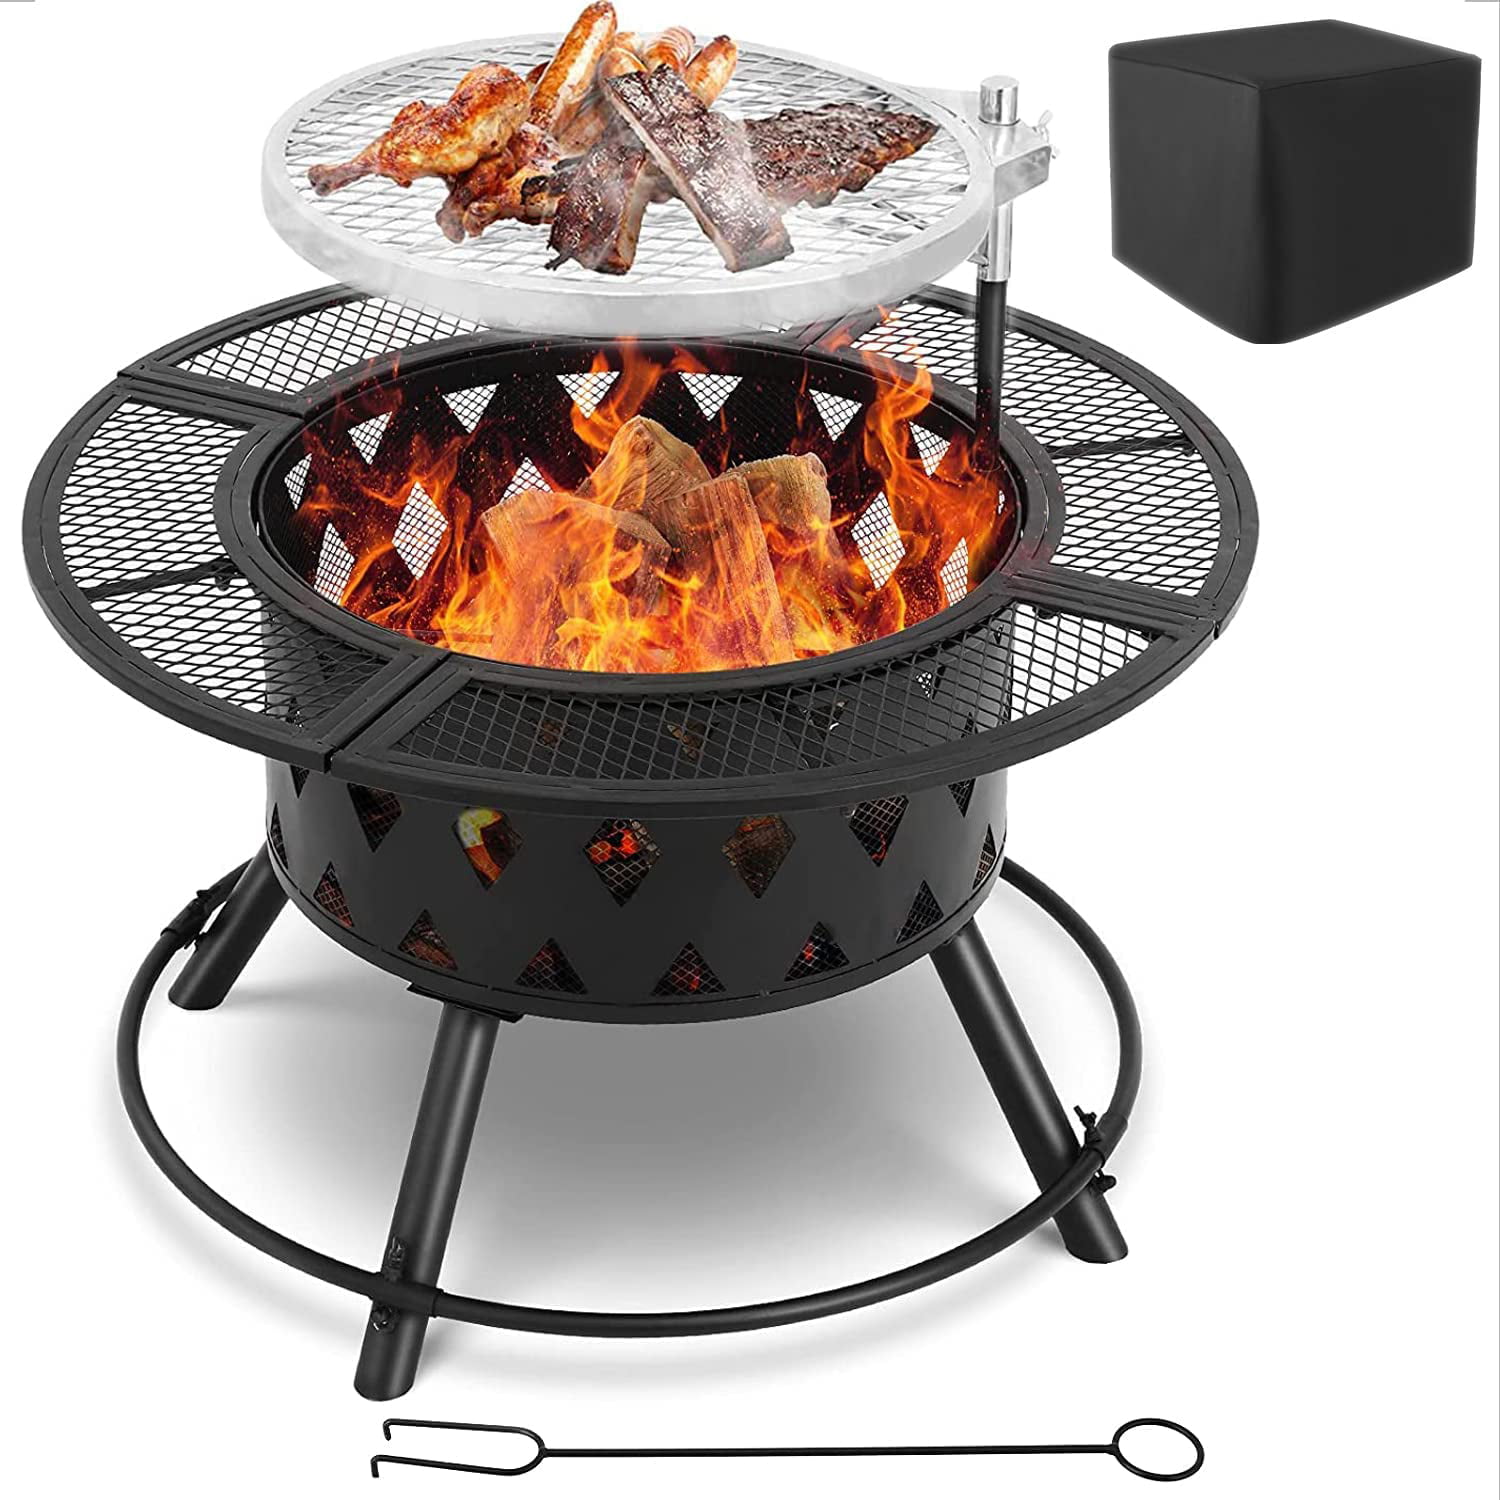 Cooking Grate Wood Burning Firepit Bowl, Fire Pit Wood Grate